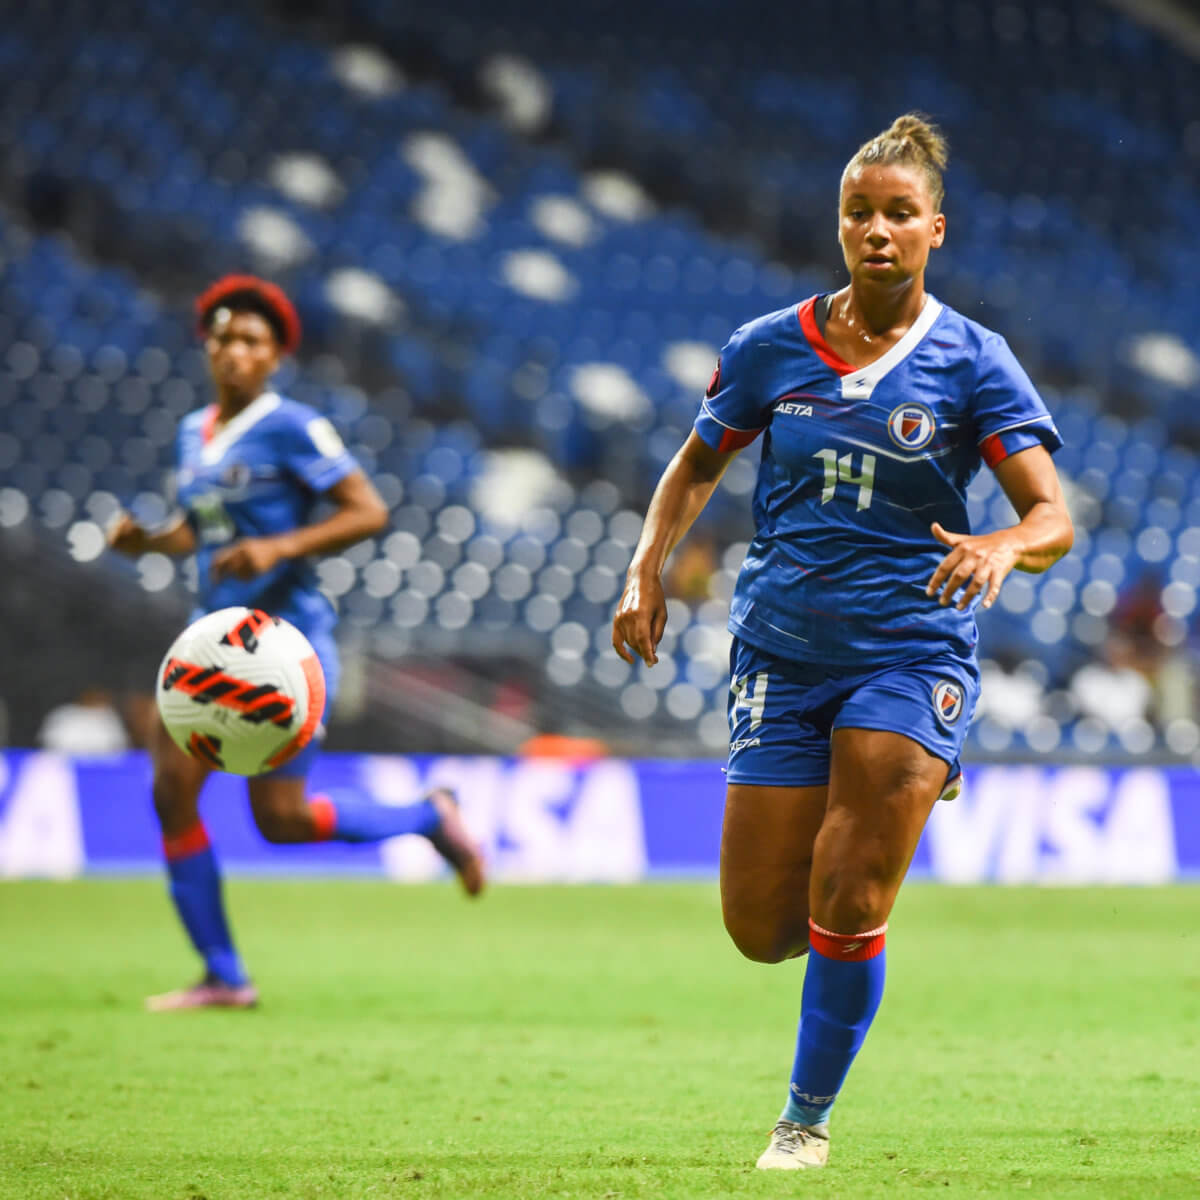 Claire Constant of Haiti during the game Jamaica vs Haiti, corresponding Group A of Concacaf W (Womens) Championship 2022, at BBVA Bancomer Stadium on July 11, 2022.